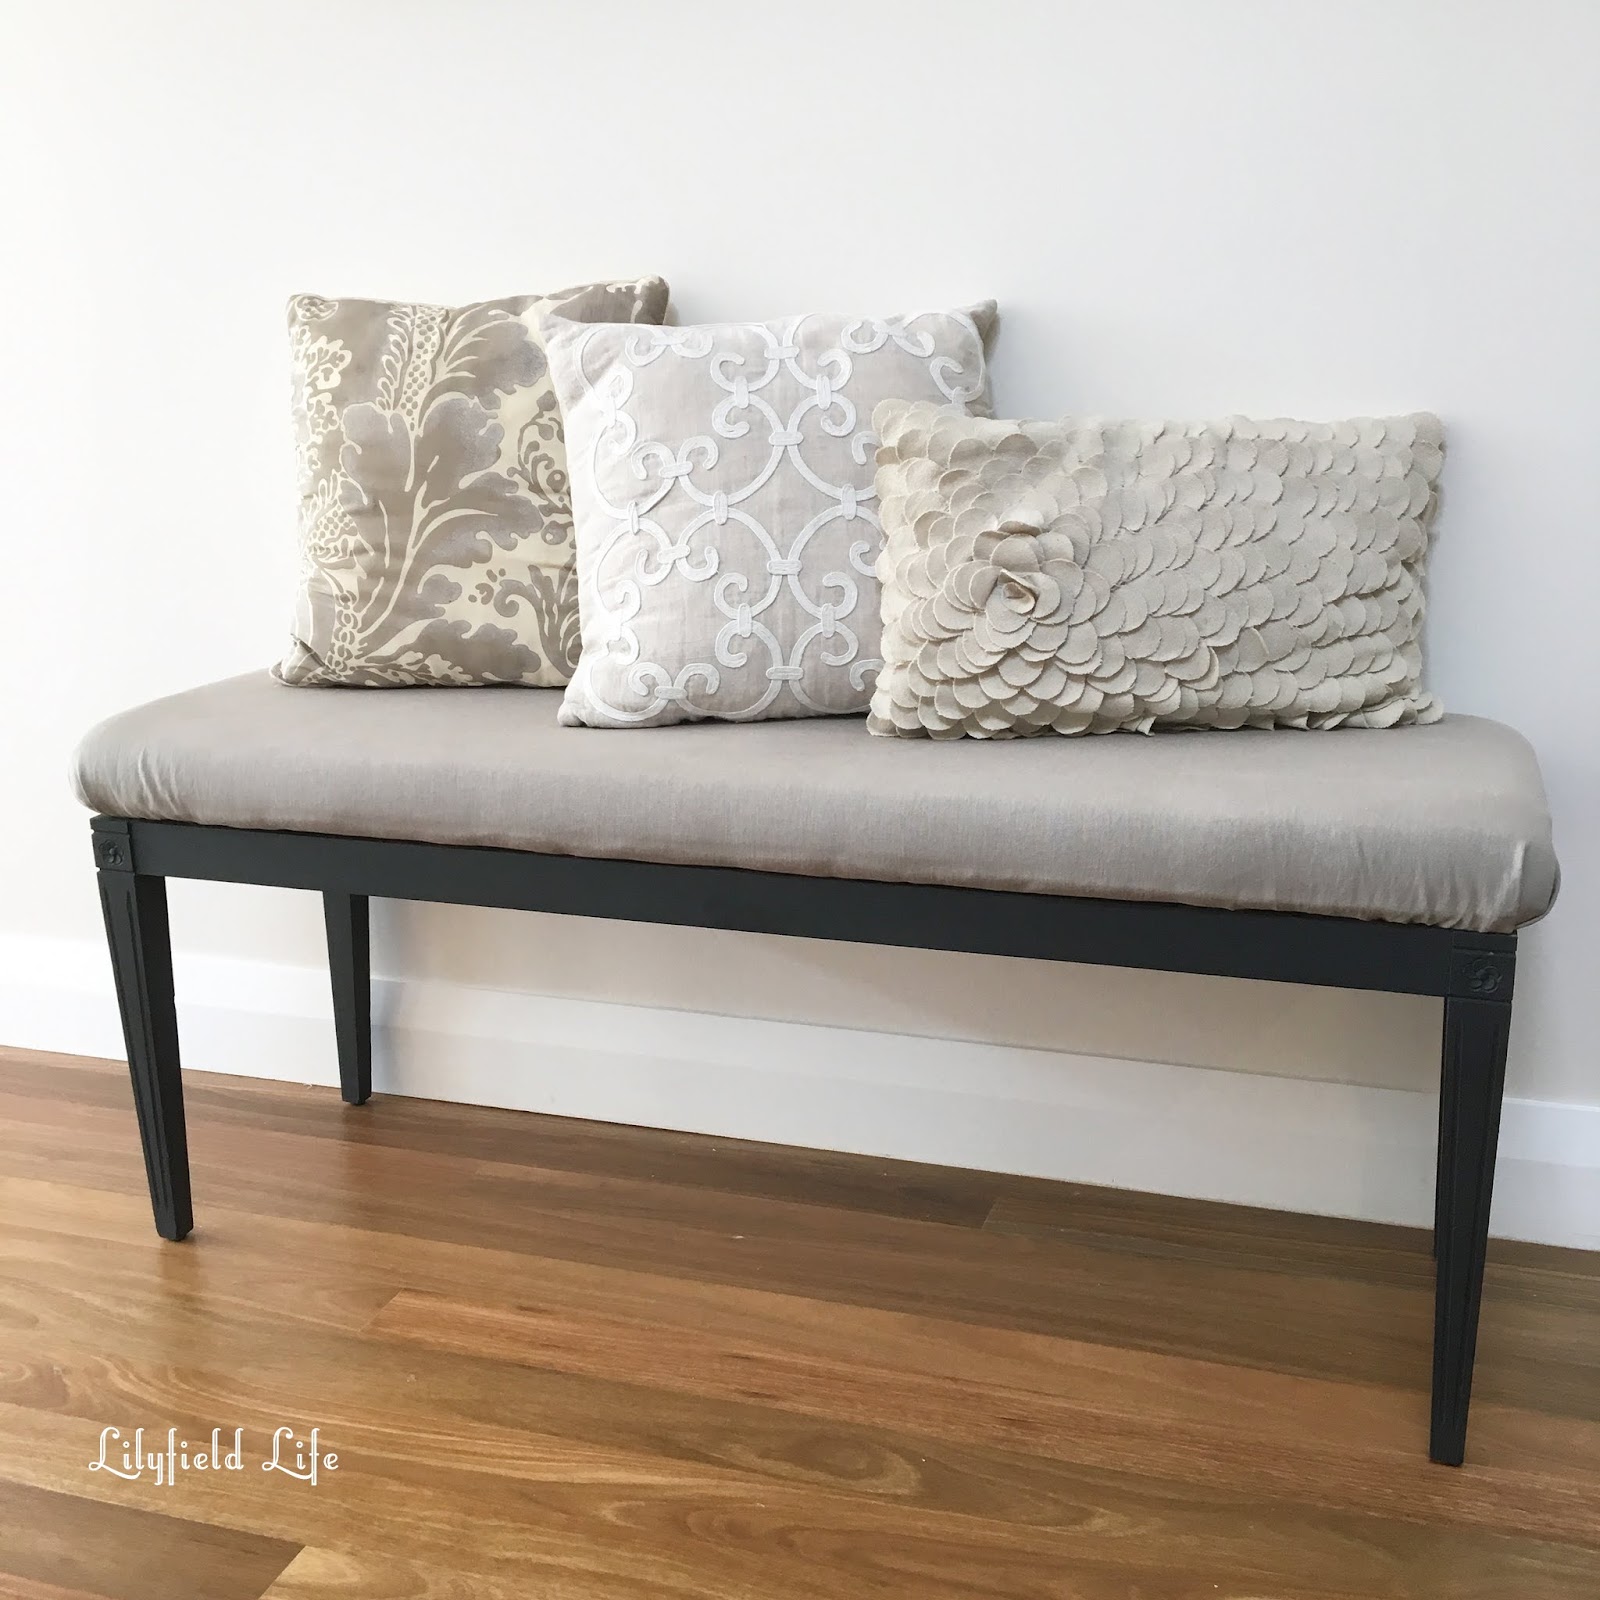 Lilyfield Life: Upholstered Bench Seat and my daughter's cushion